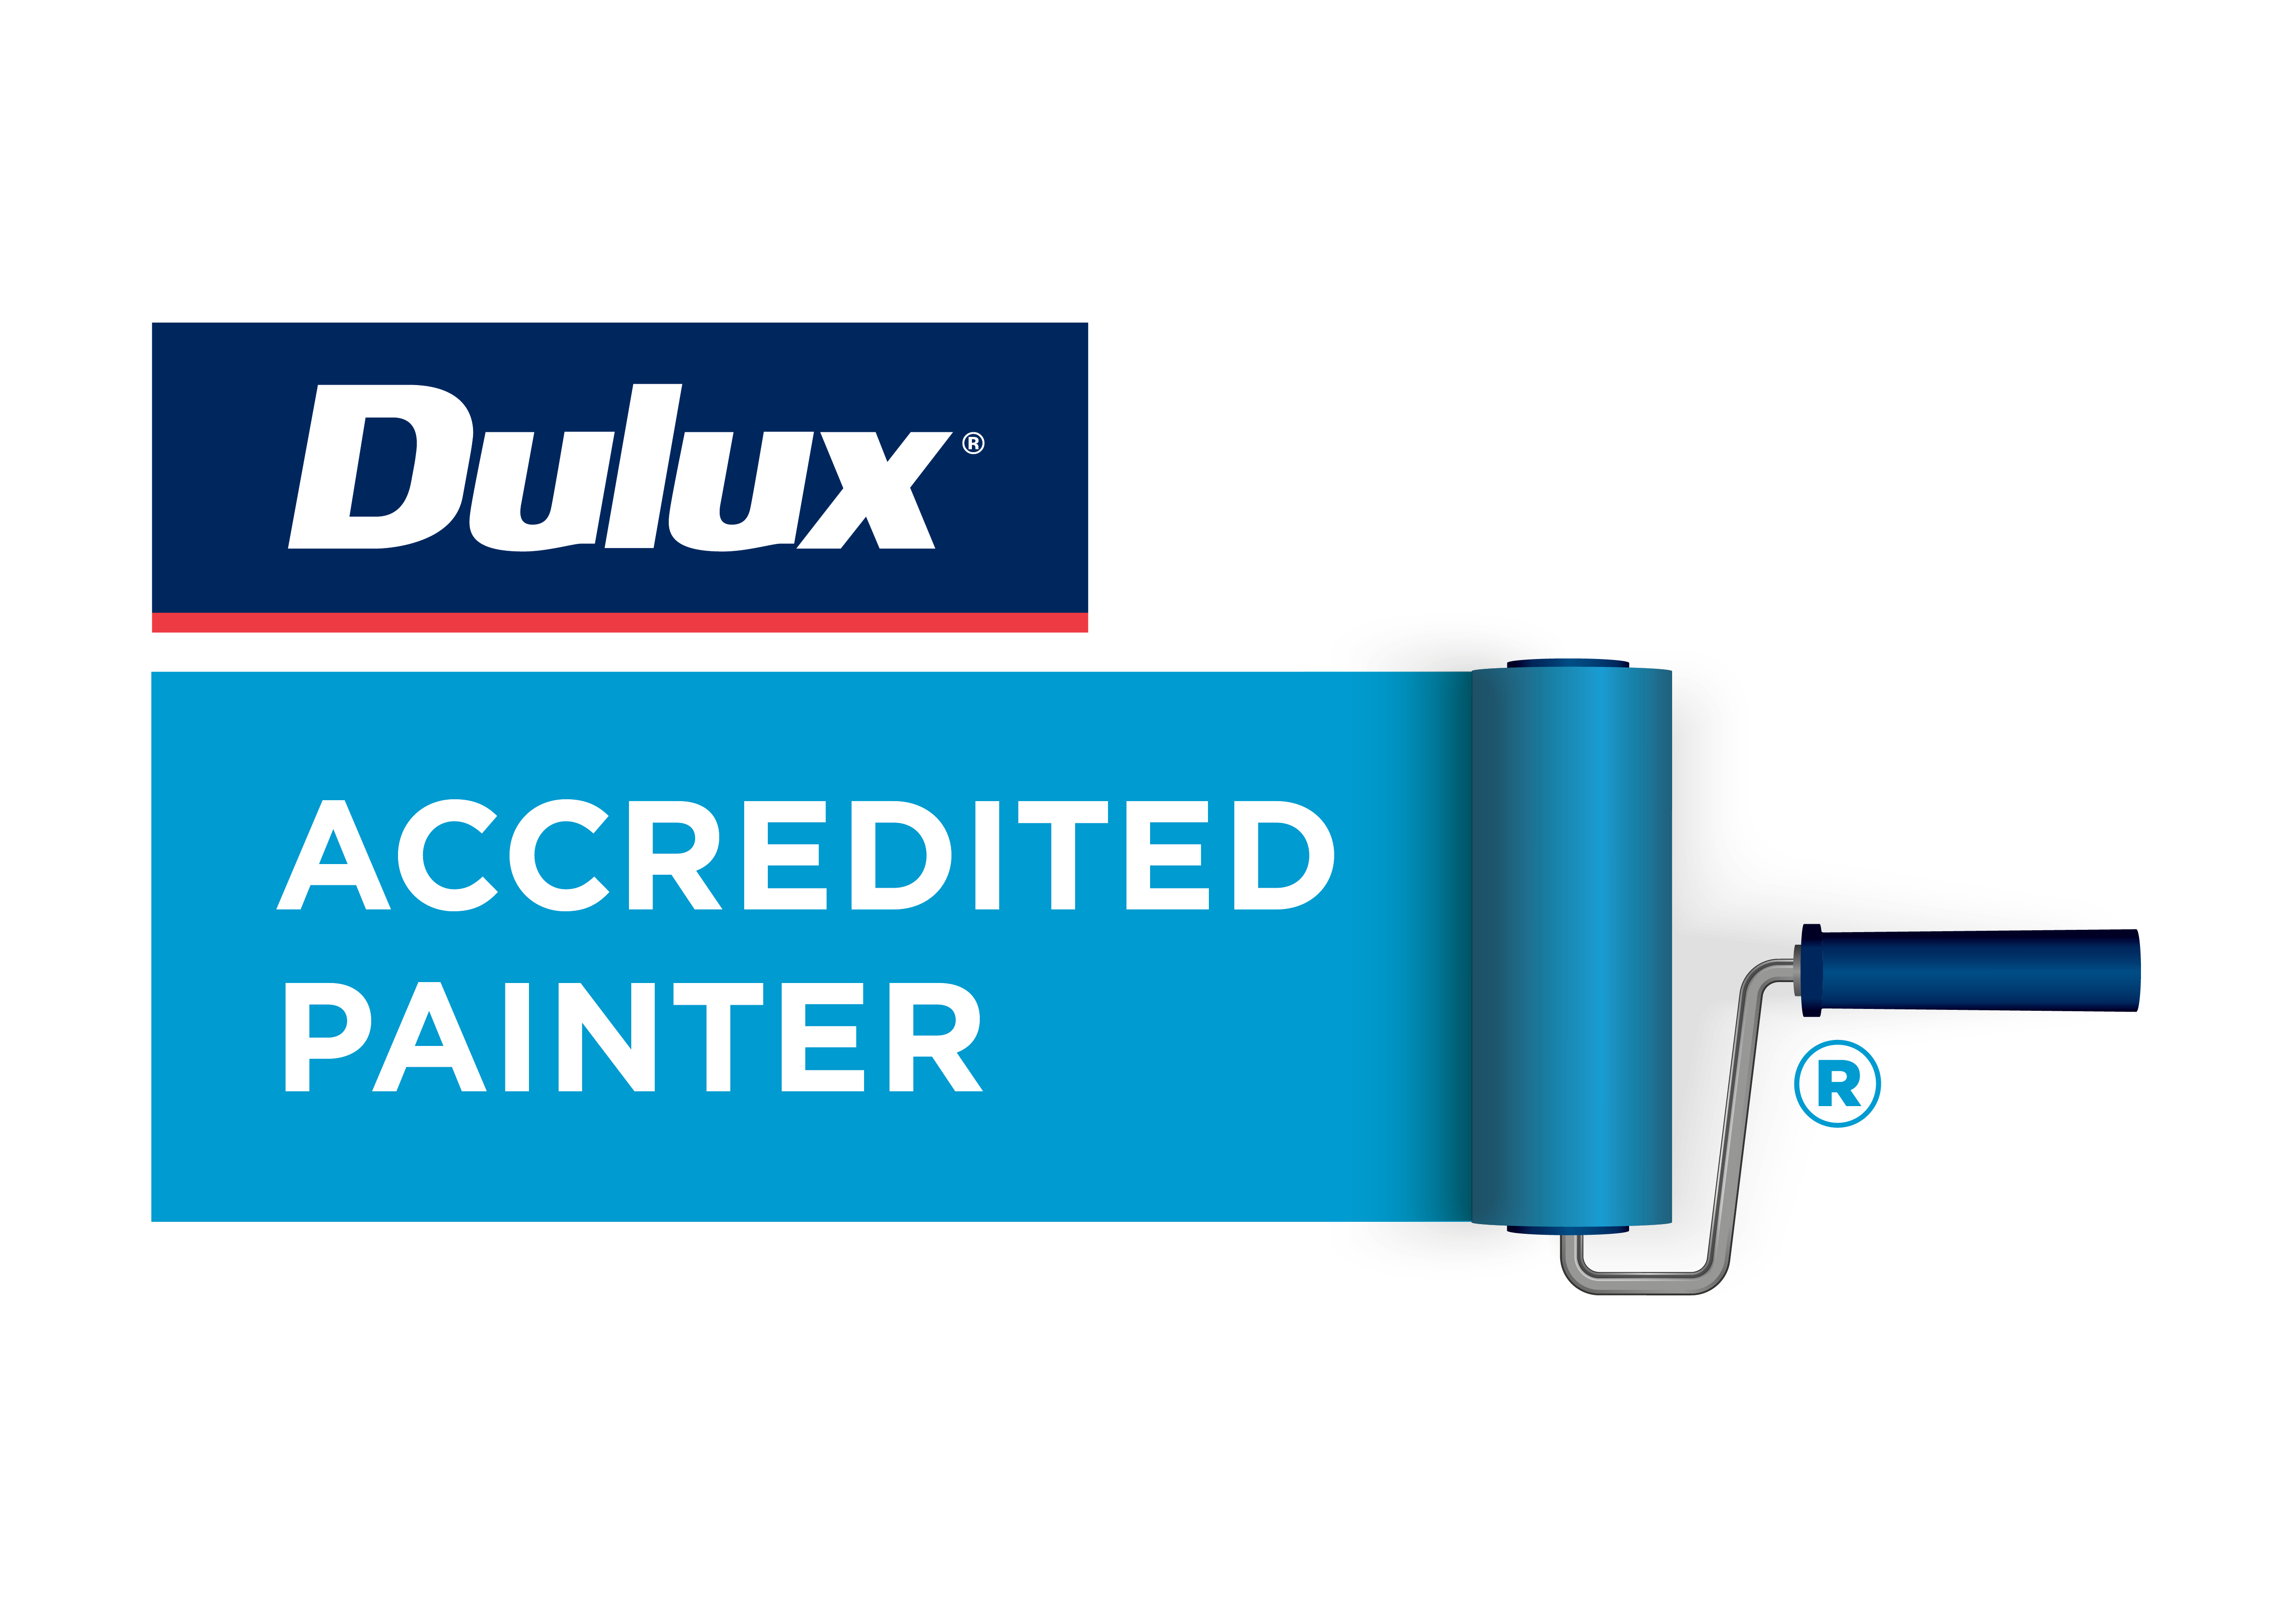 Accredited Painter Delux NZ